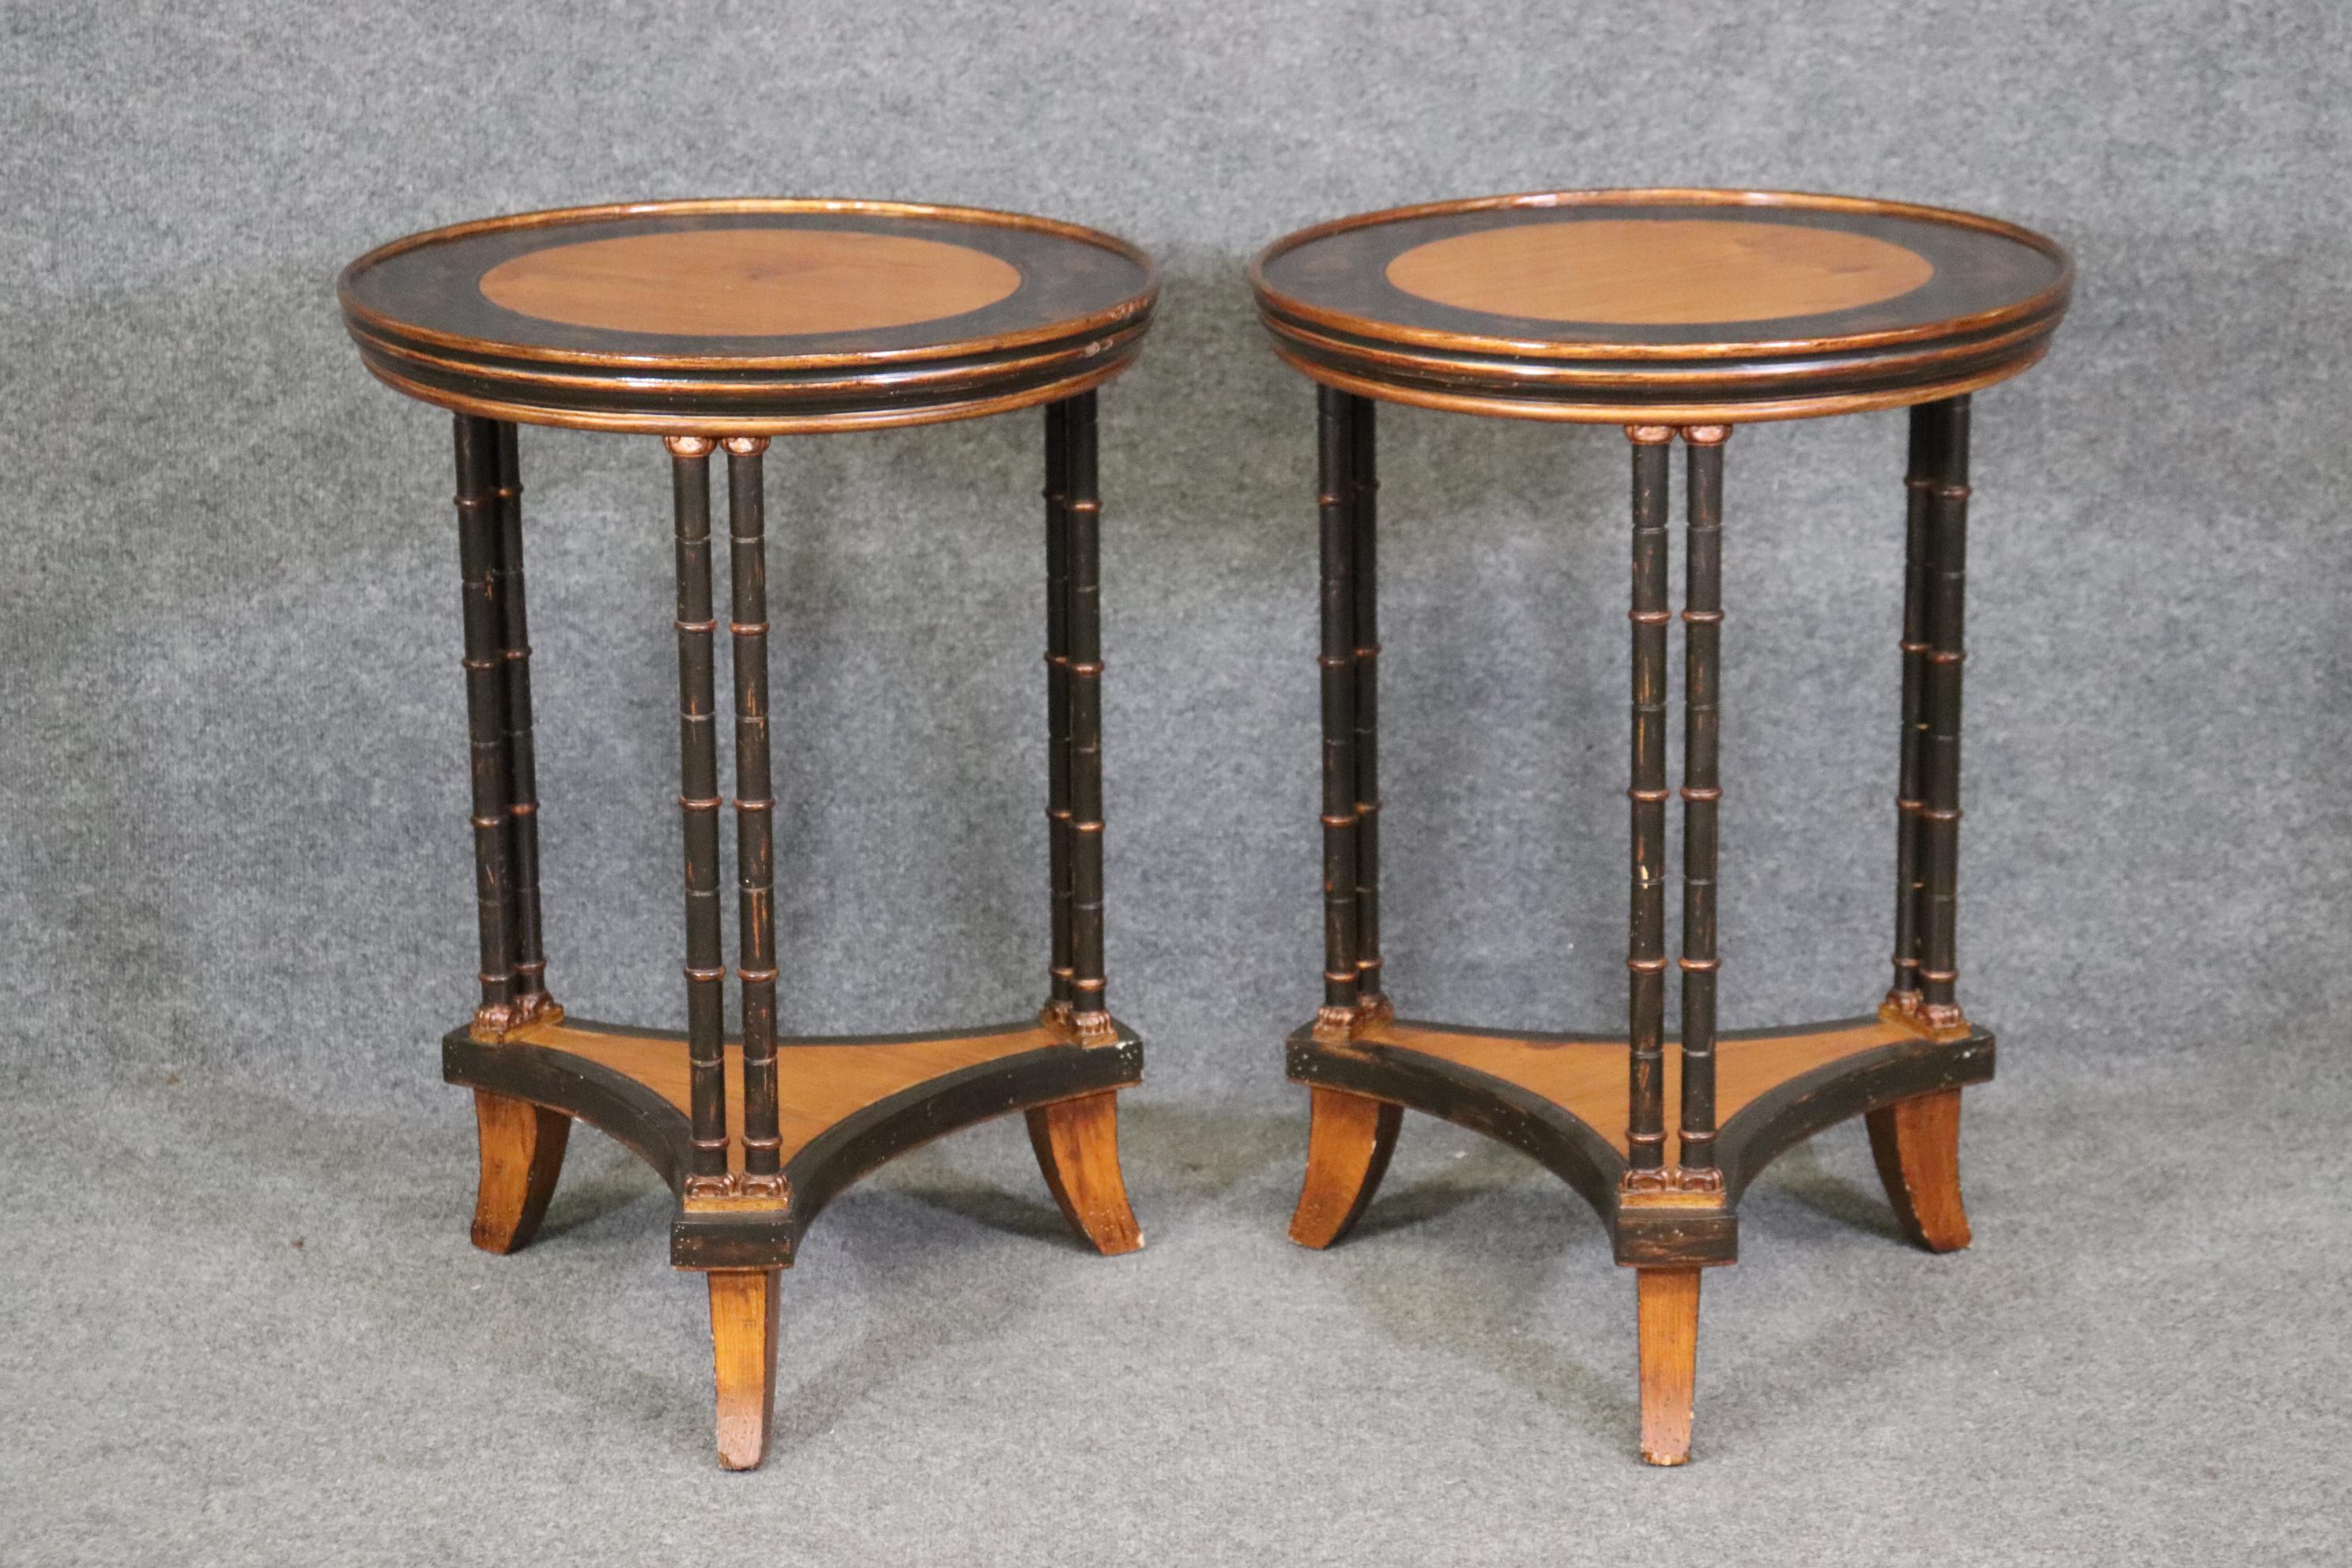 Pair of Chinoiserie Painted Faux Bamboo Yew Wood Gueridon Side Tables  For Sale 1